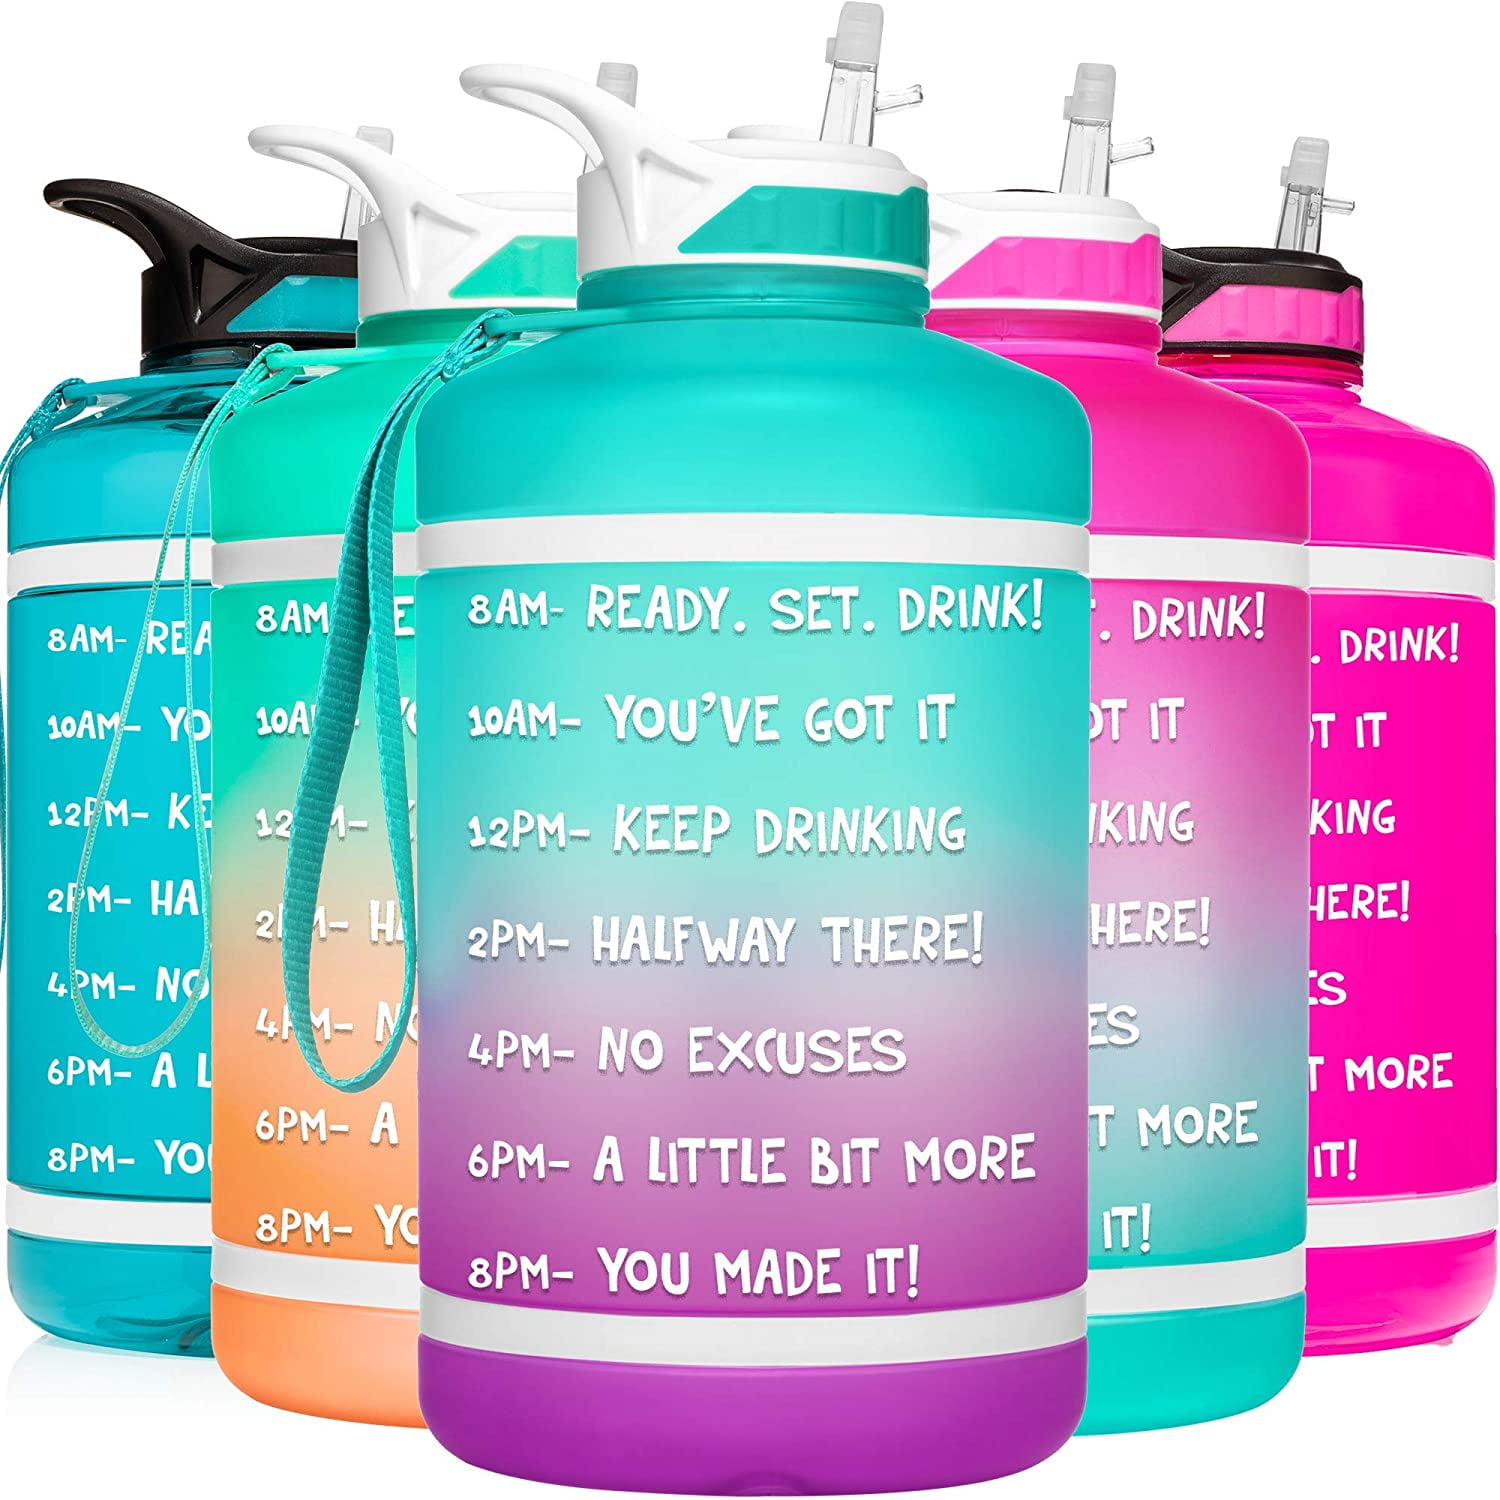 HydroMATE 1 Gallon Motivational Water Bottle with Time Marker Large BPA Free Jug with Straw & Handle Reusable Leak Proof Bottle Time Marked Drink More